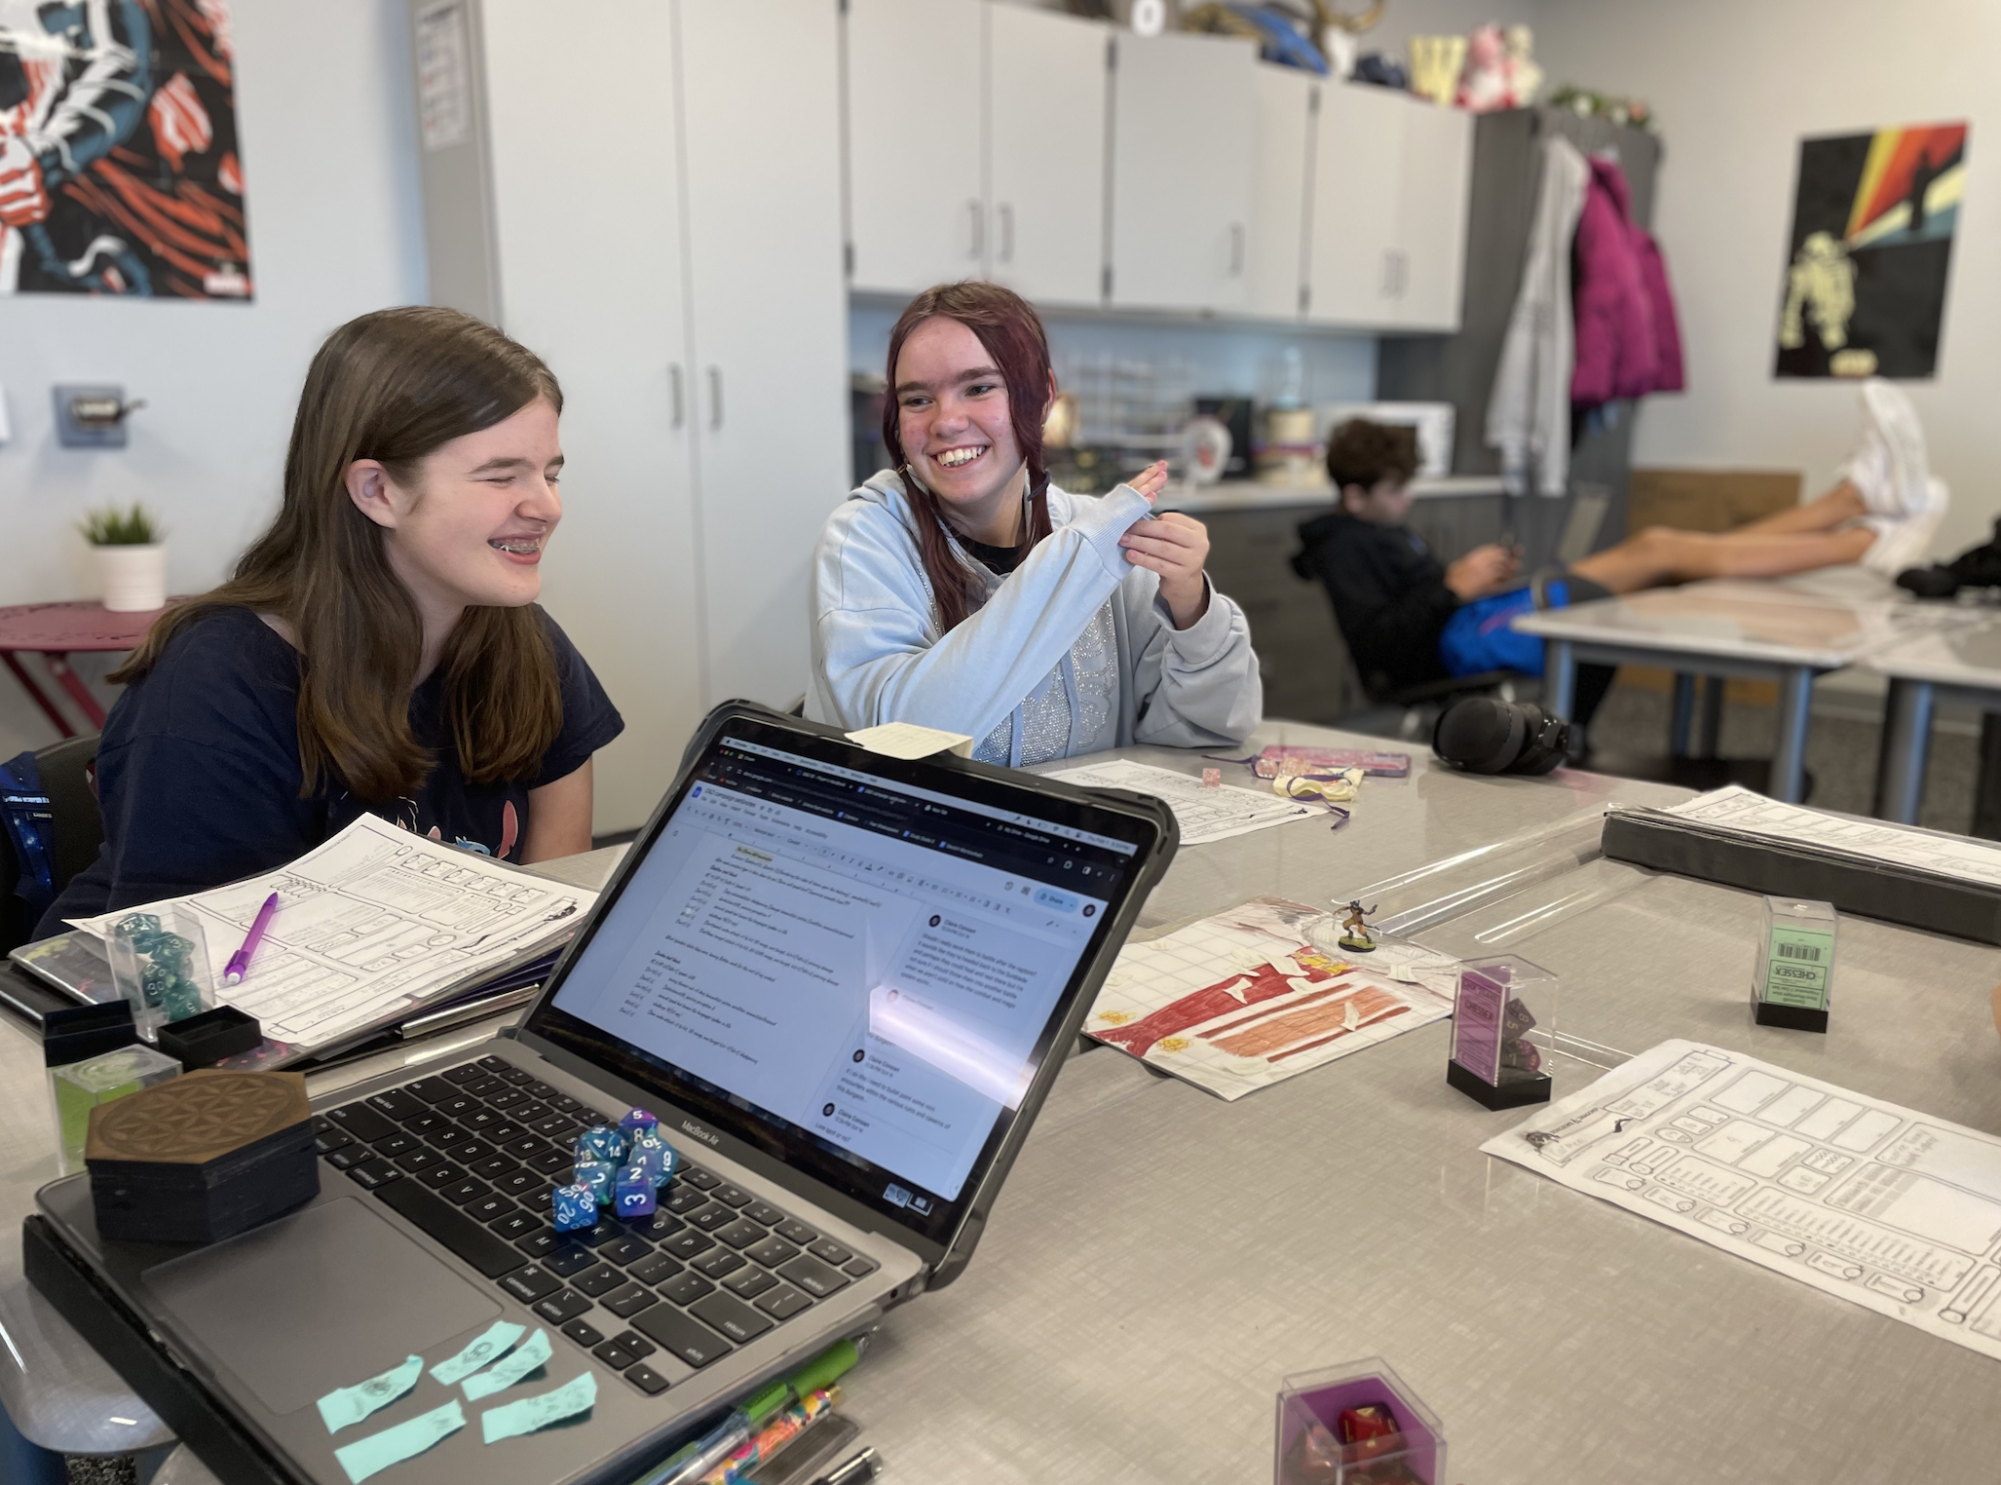 Playing through their campaign on Feb. 1, Katelyn Clayton (9) and Abigail Sullivan (9) laugh with the rest of their campaign group.